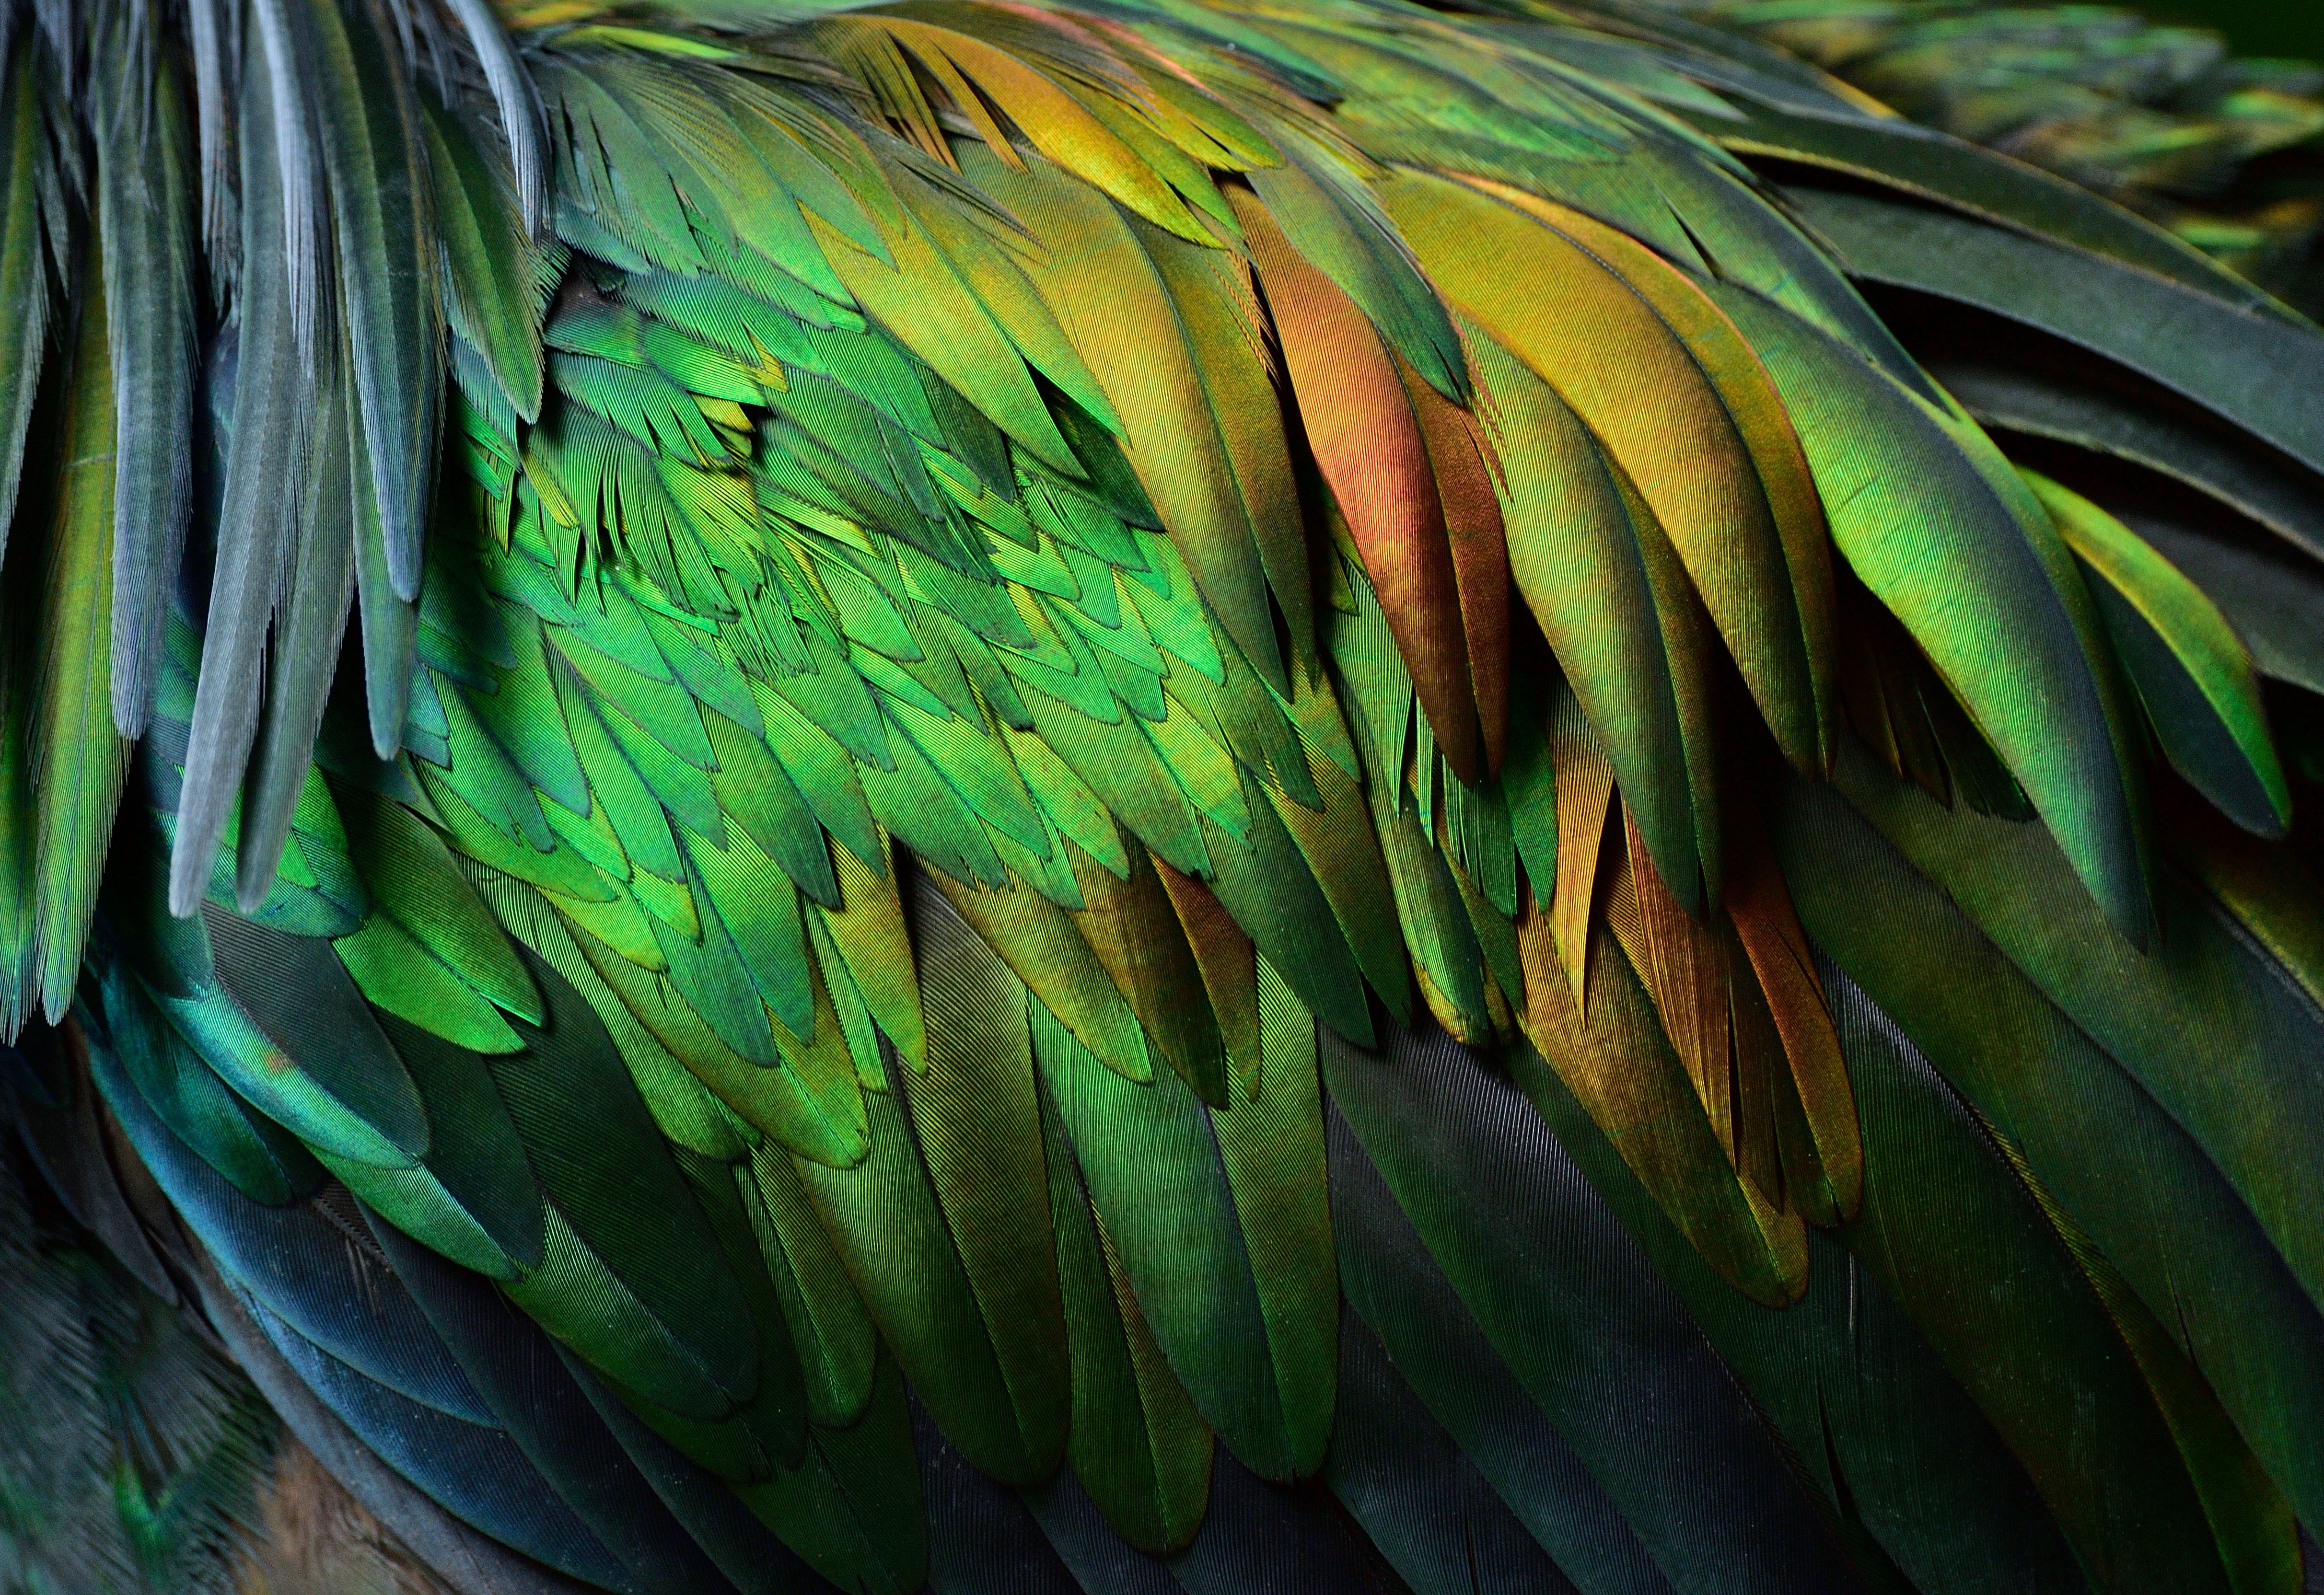 The rainbow-colored, lustrous feathers of a Nicobar pigeon. | Source: Shutterstock